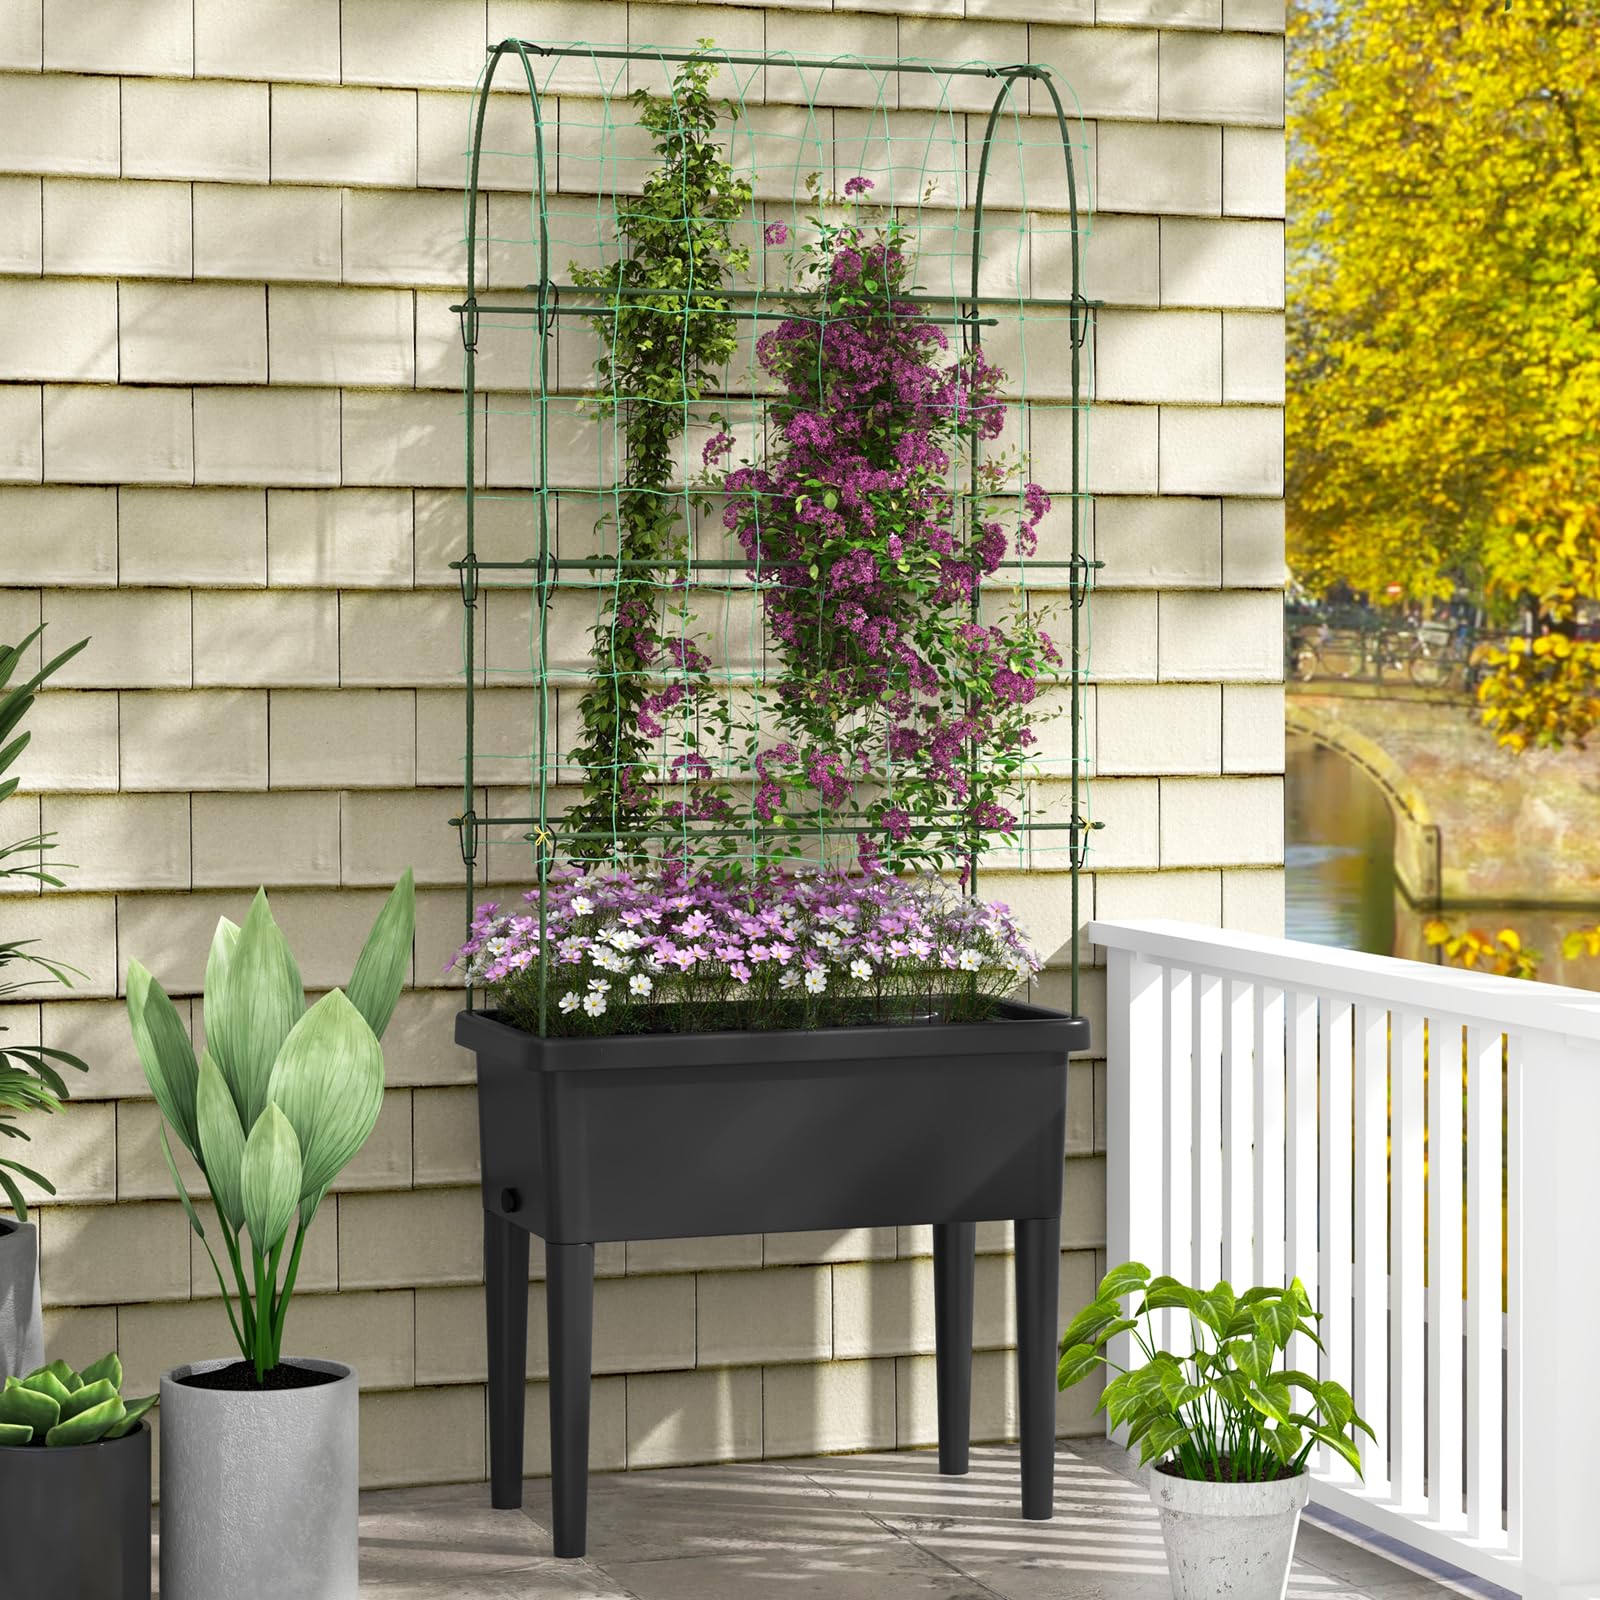 Giantex Raised Garden Bed with Climbing Trellis, Self-Watering Elevated Planter